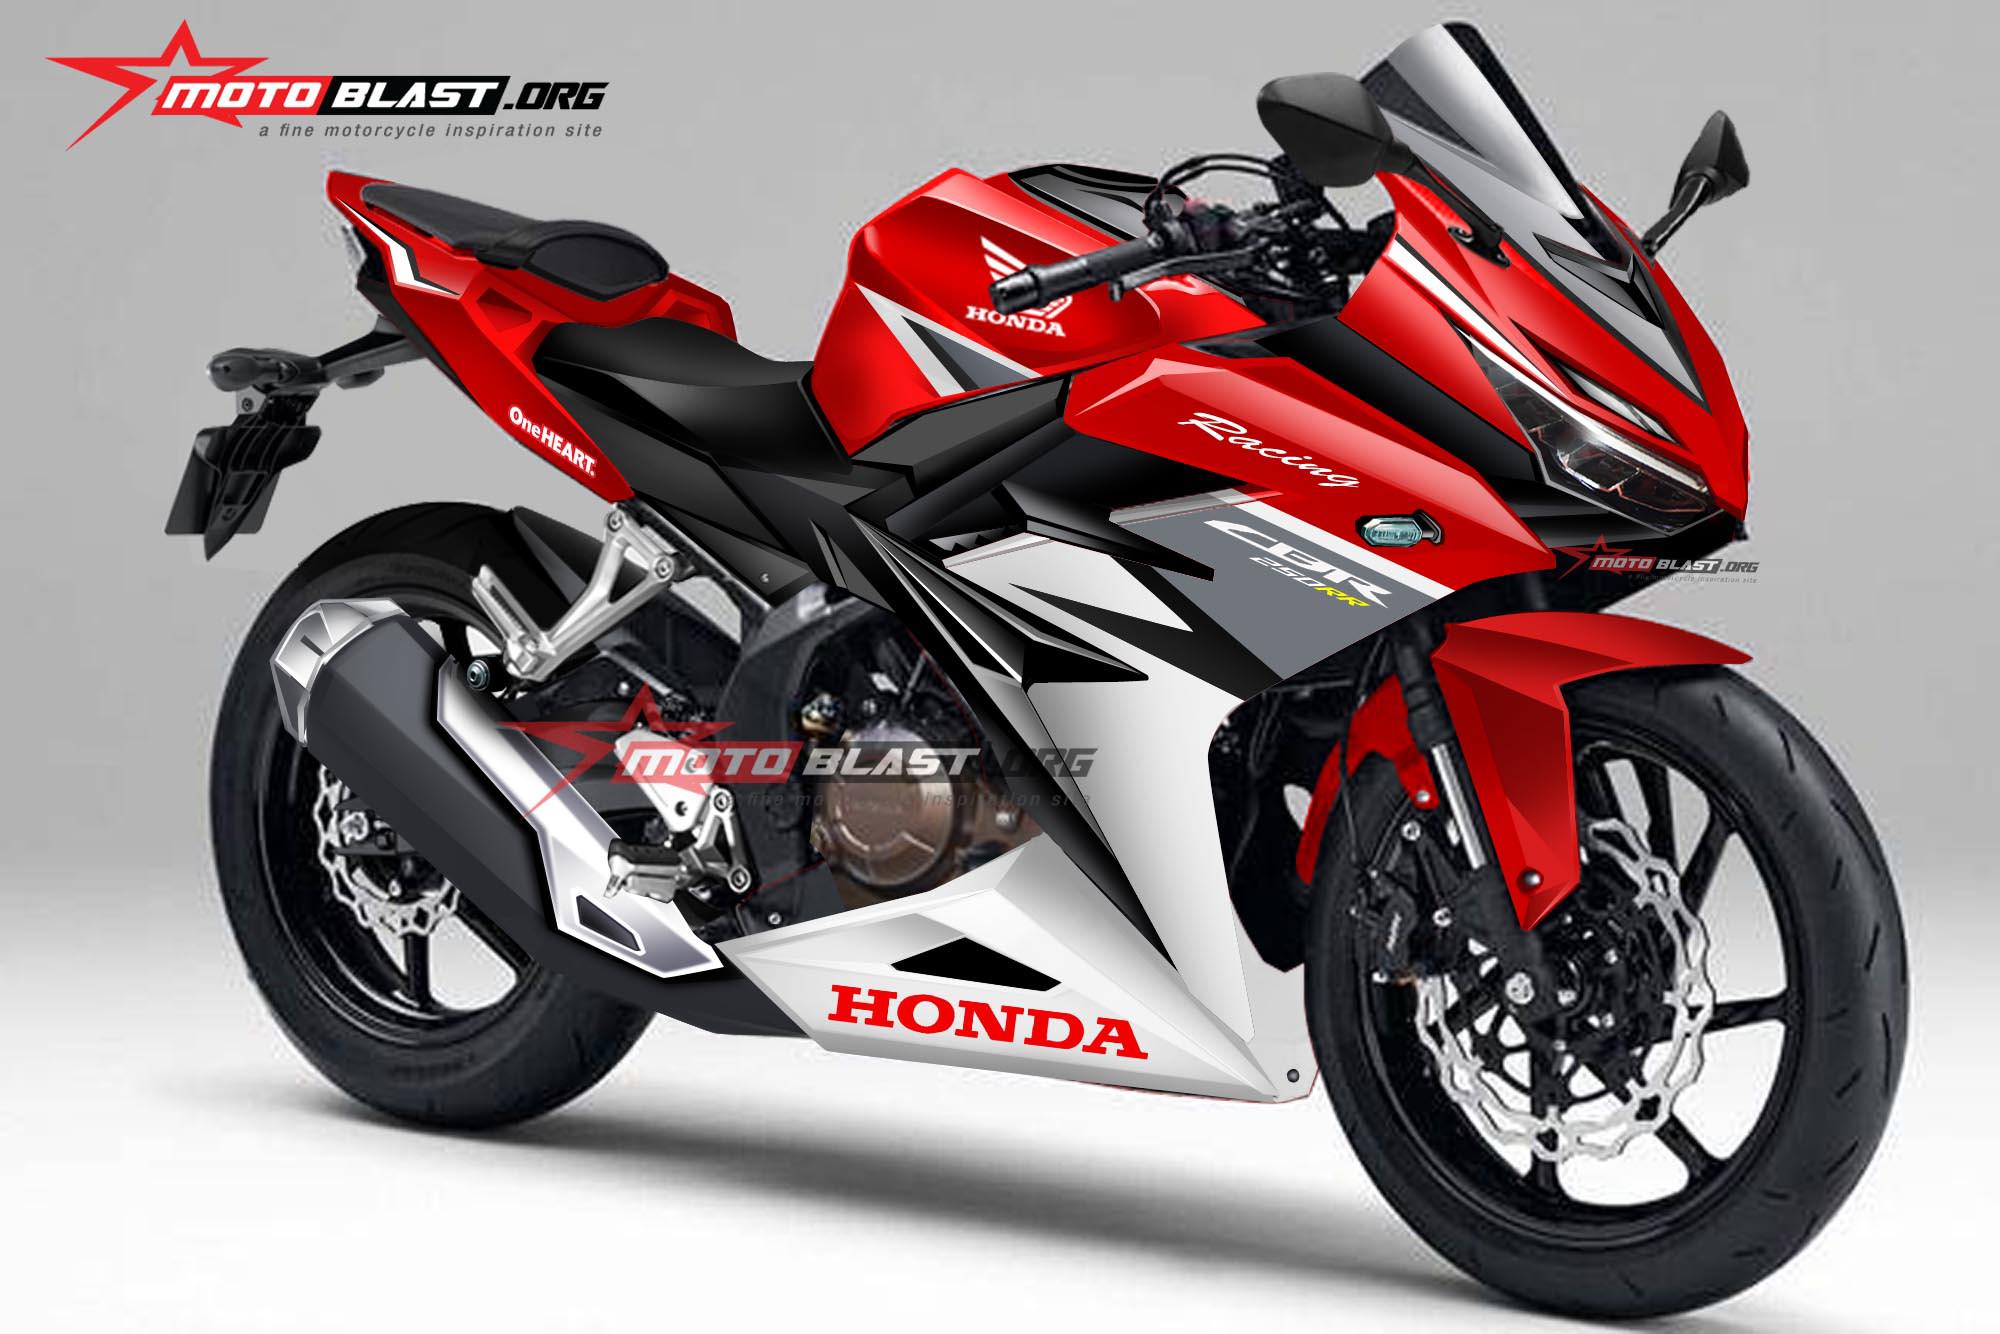 New 2017 Honda CBR Pictures Could THIS Be The One